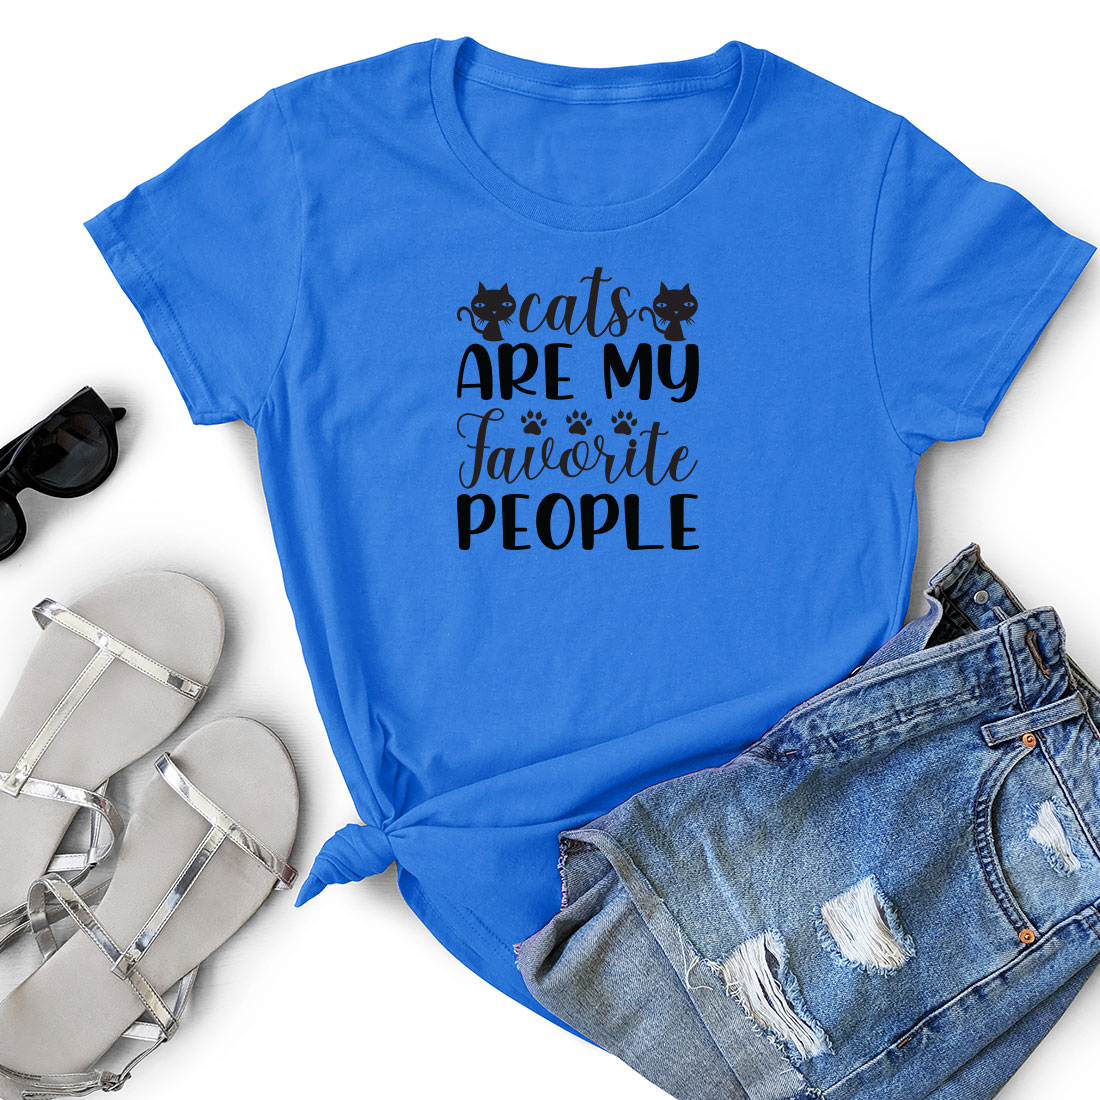 T - shirt that says cats are my favorite people.